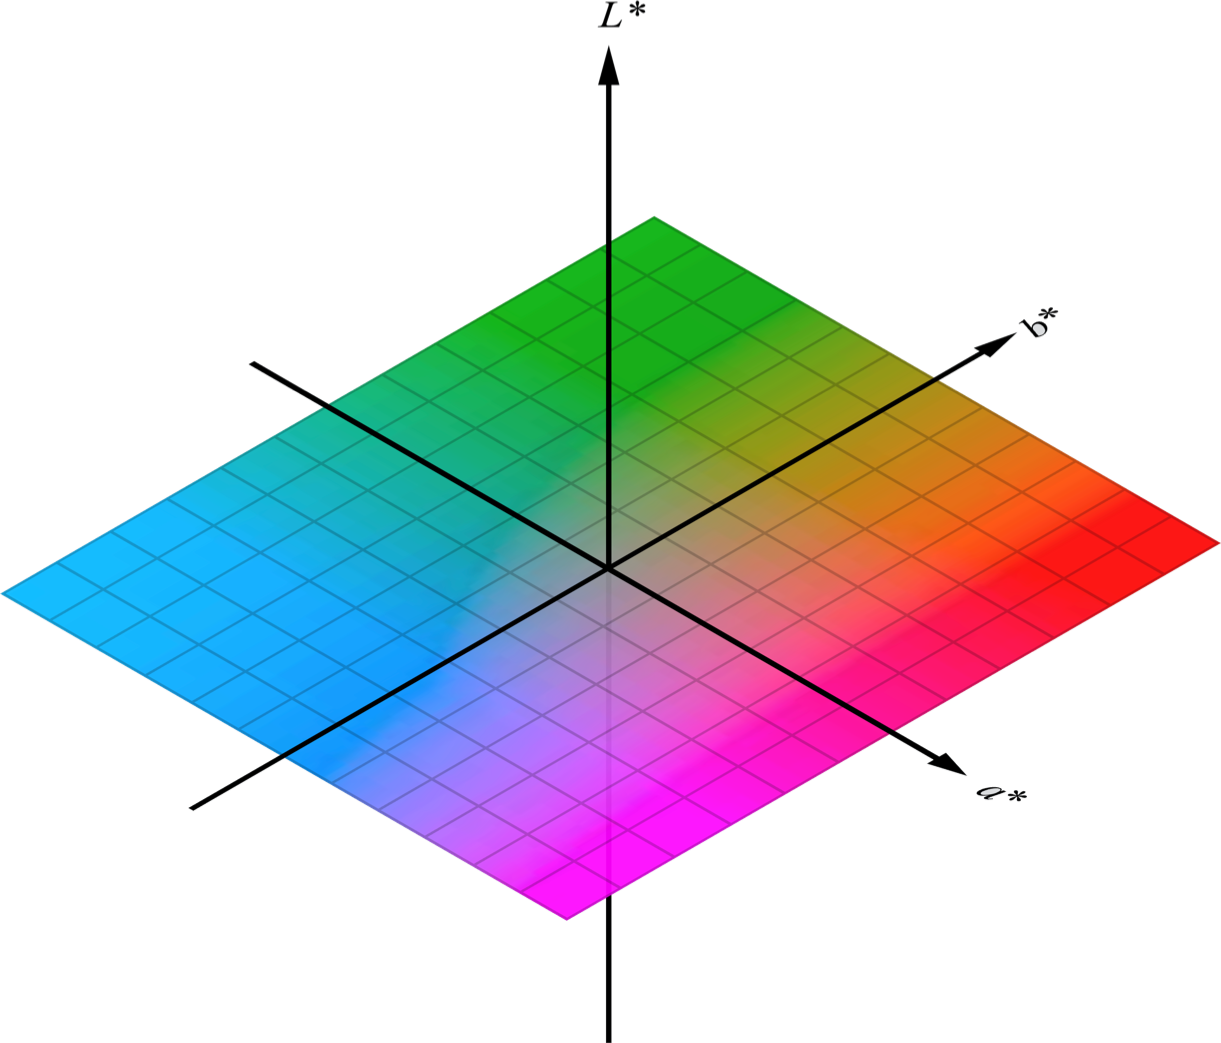  A 3D representation of the CIELAB color space. It shows a color model where the vertical axis (L*) represents lightness, and the color dimensions (a* and b*) are plotted on the horizontal axes. The a* axis goes from green to red, and the b* axis goes from blue to yellow, forming a color plane at an L* value. The spread of colors transitions smoothly from one hue to another, demonstrating the model's ability to encompass the full range of human color perception. Nilsjohan, CC BY-SA 4.0 <https://creativecommons.org/licenses/by-sa/4.0>, via Wikimedia Commons